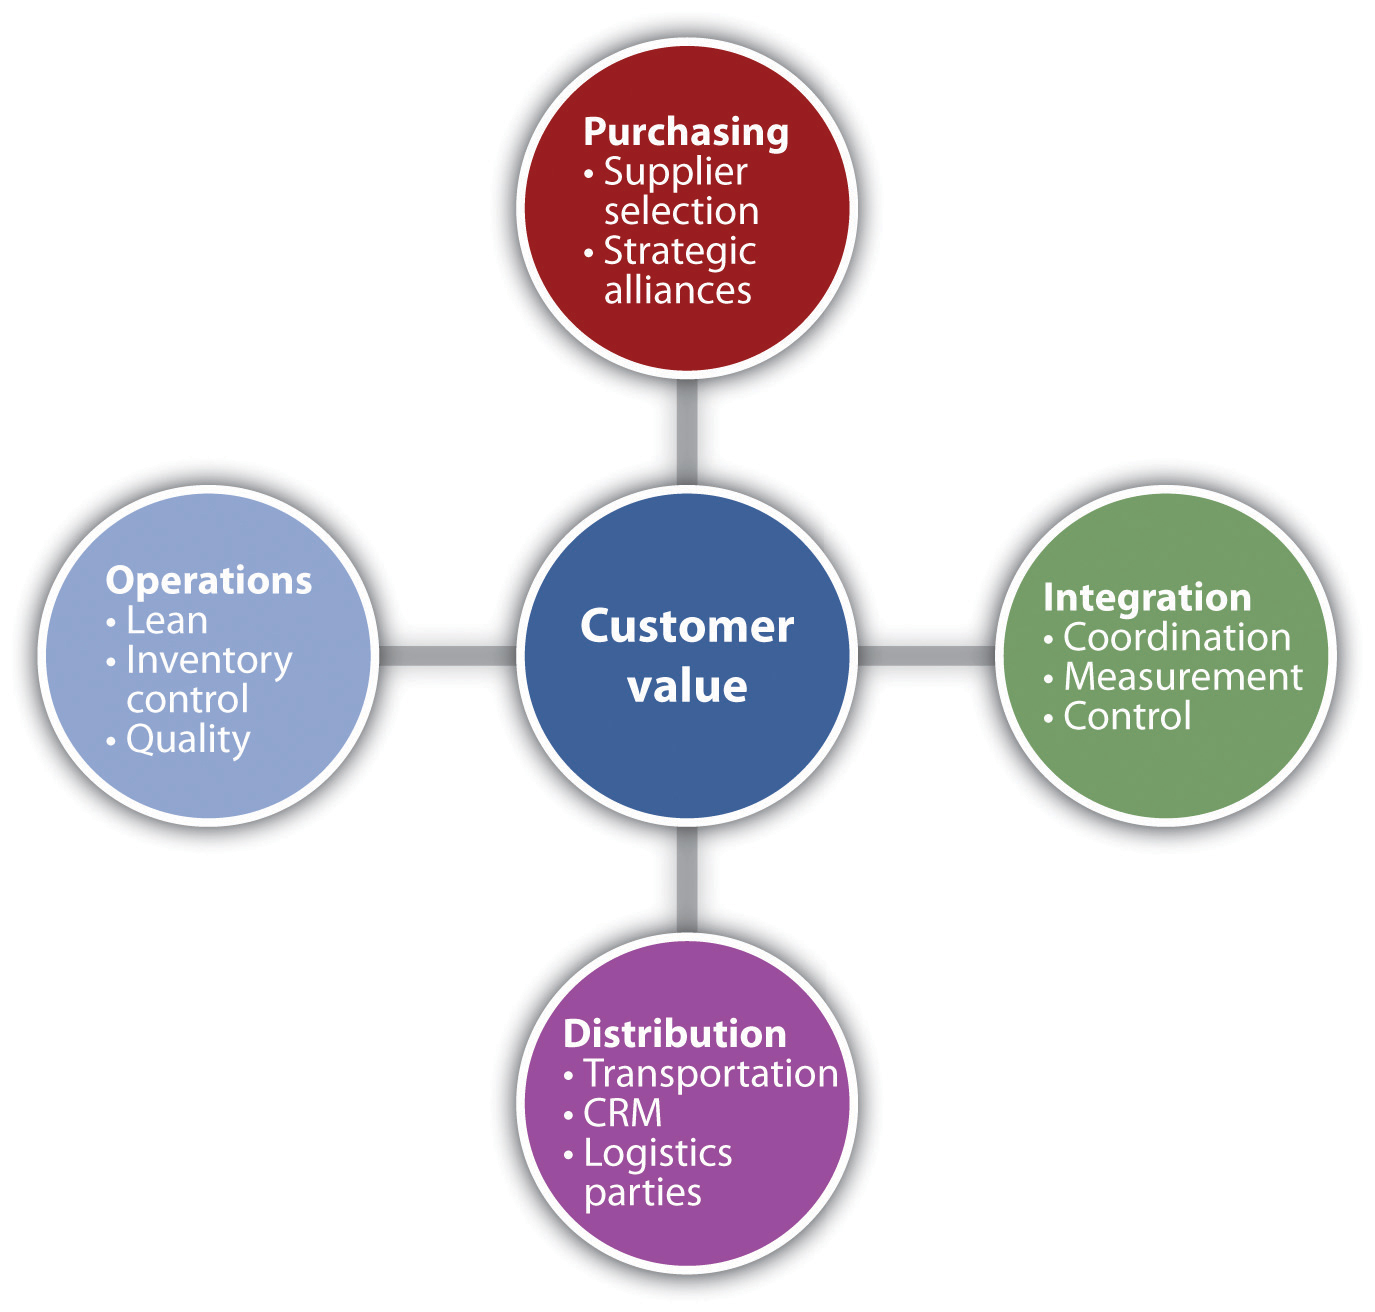 The Core Elements of a Supply Chain Management System: customer value created through purchasing, integration, distribution, and operations